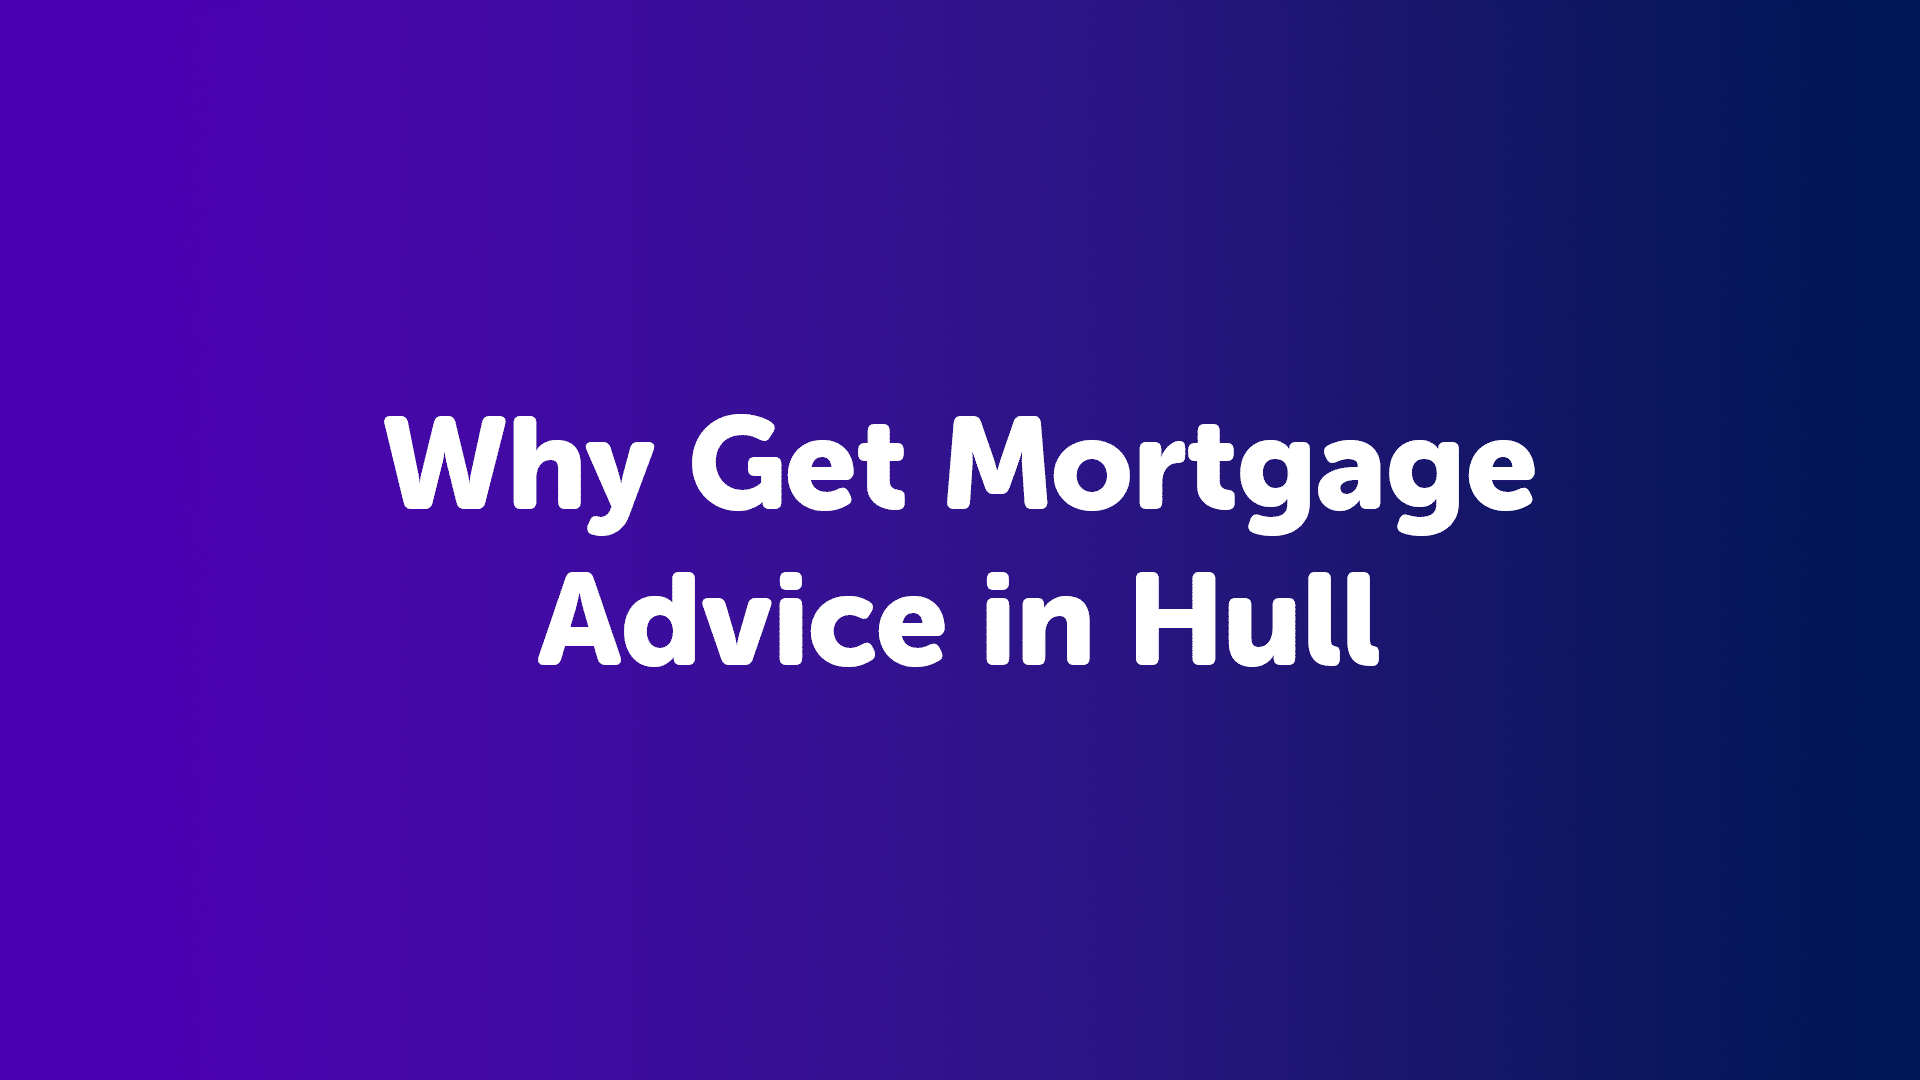 Why Get Mortgage Advice in Hull?